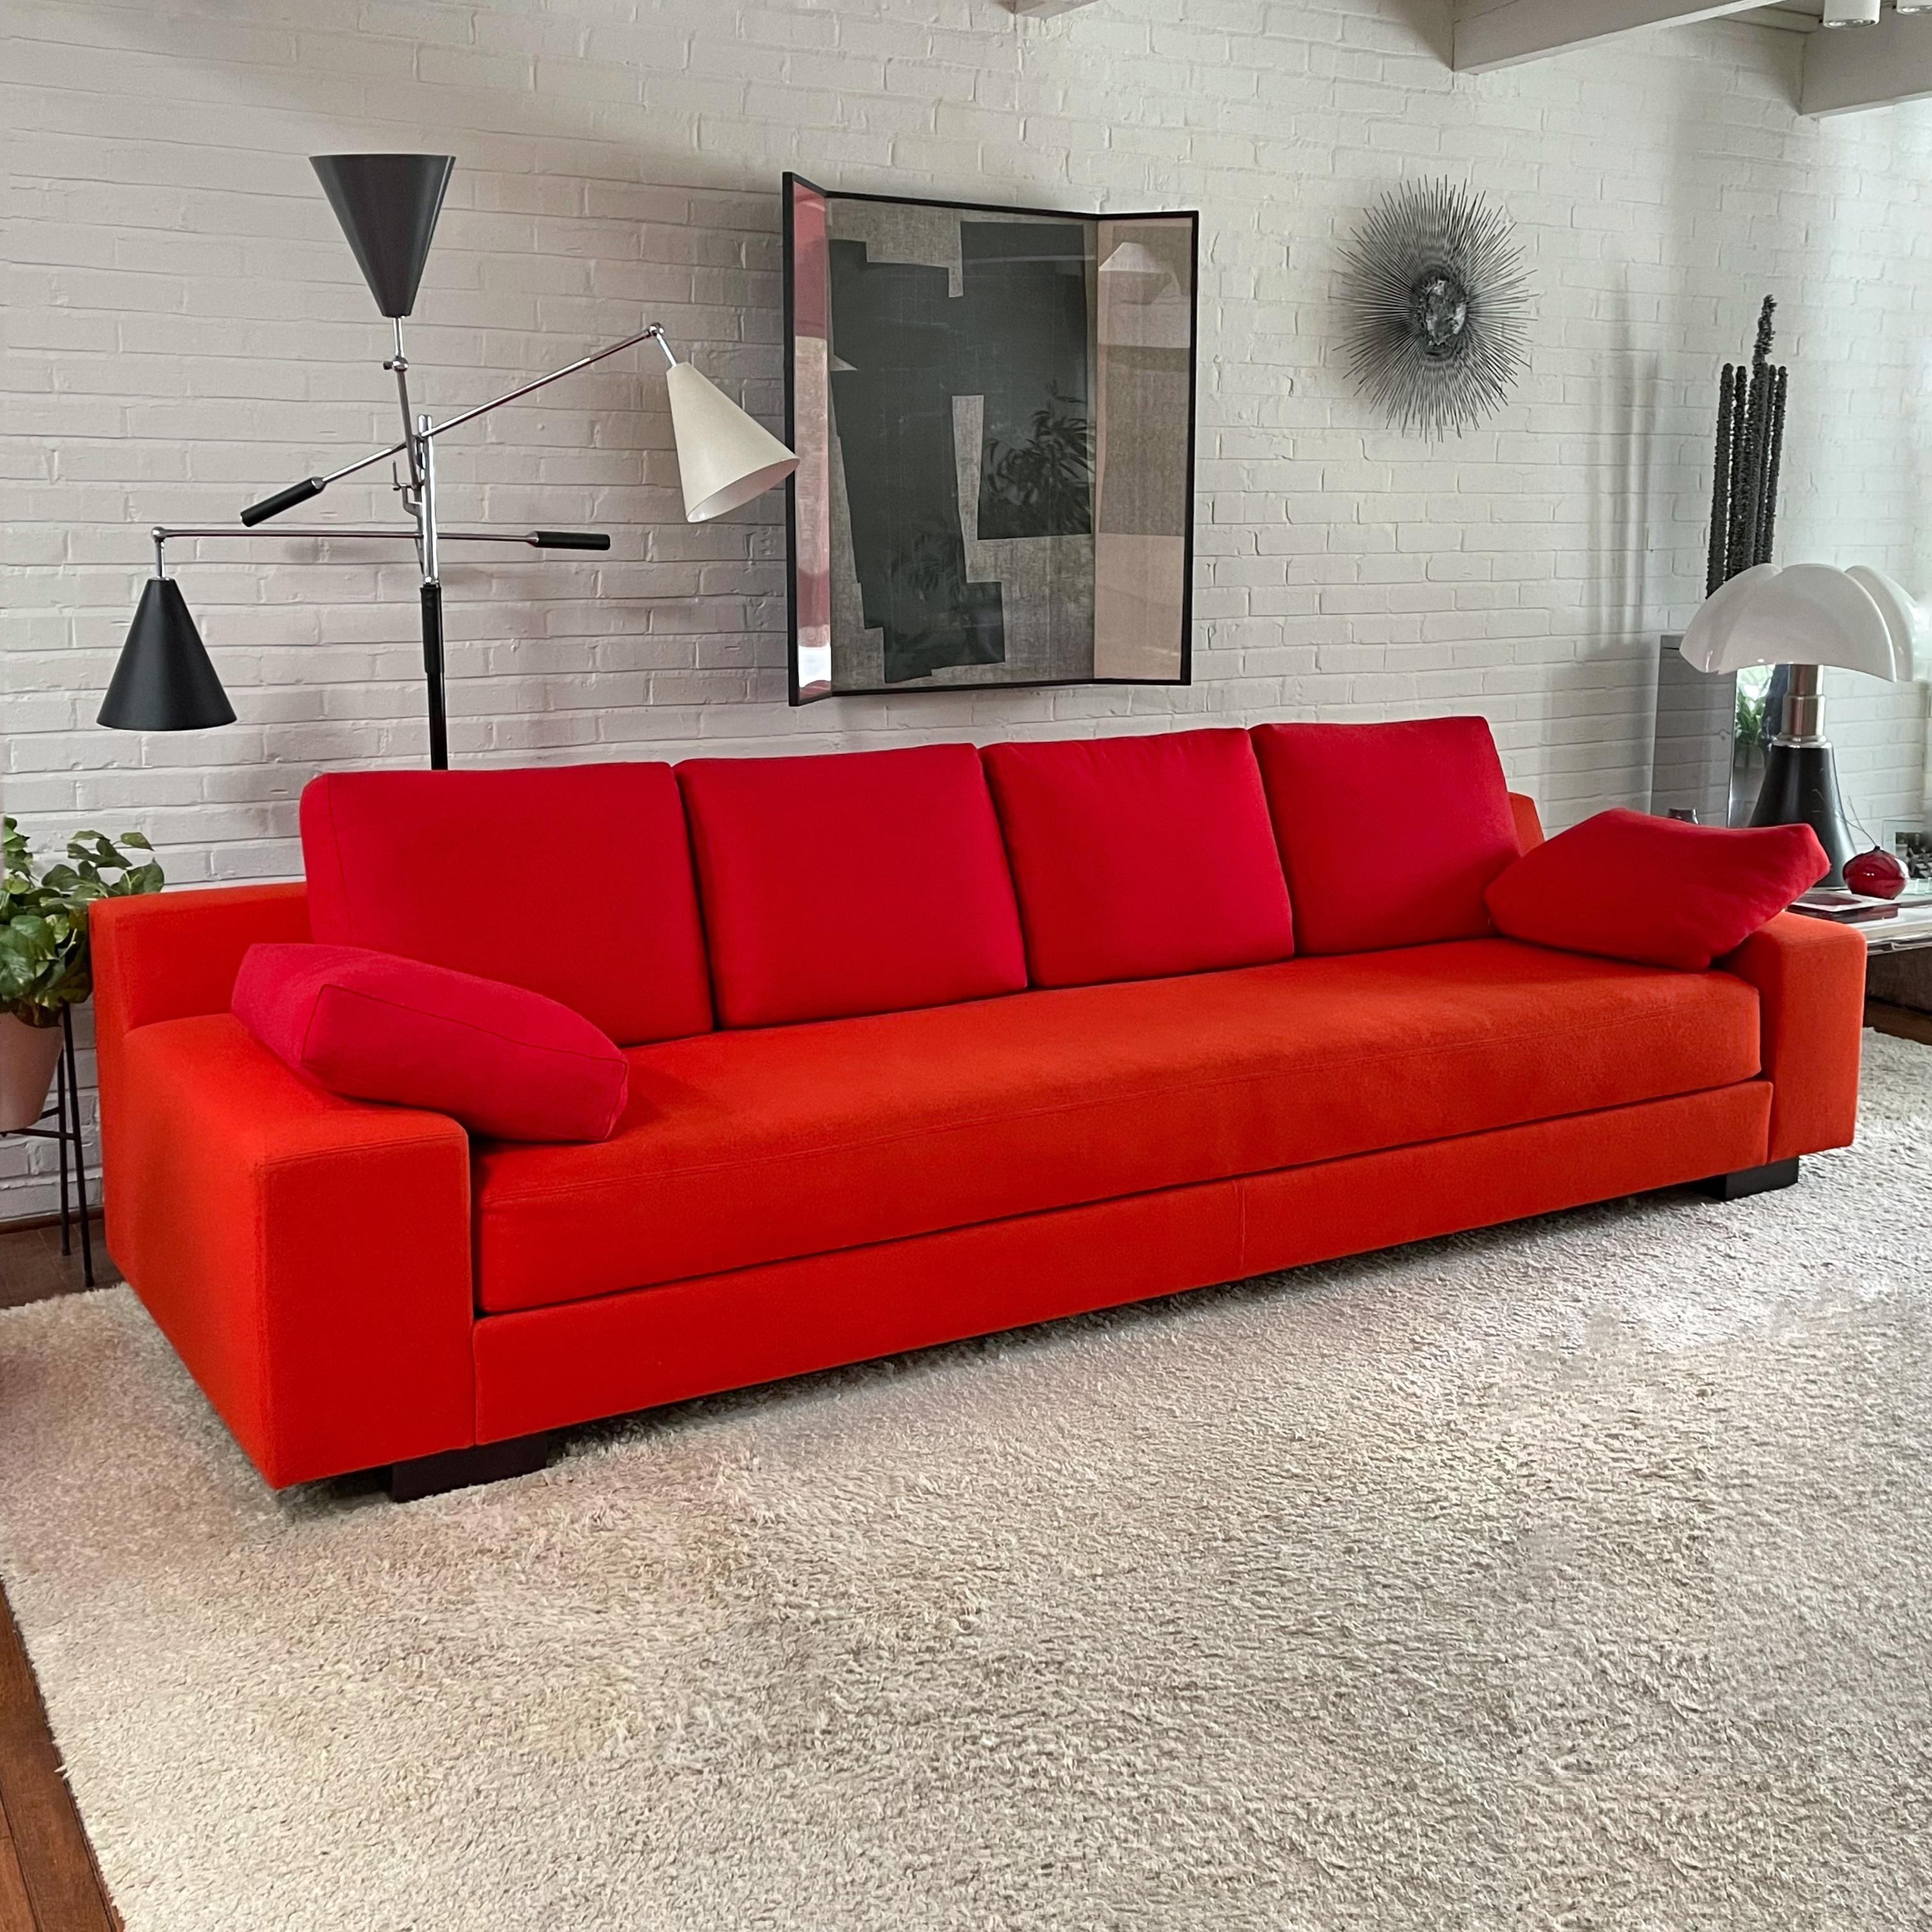 Large, lush, and lovely, this stunning sofa by Christian Liaigre for Holly Hunt is deep, comfortable, and stylish. Upholstered in a vivid red-orange felted wool fabric, possibly Davina by Maharam, it is a statement piece for those that don't fear